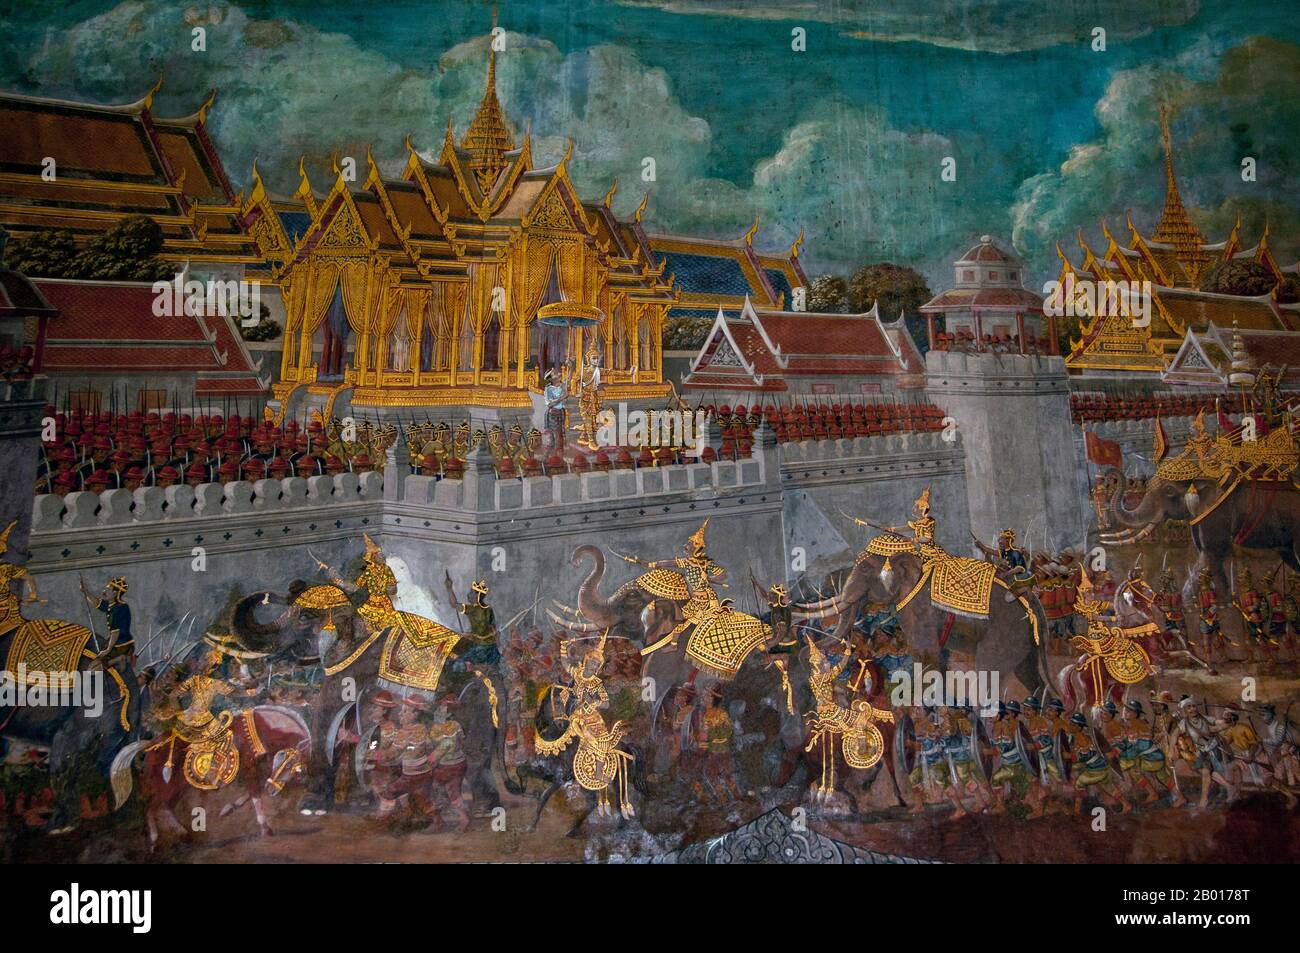 Thailand: The king inspects his troops from Wat Phra Kaew (The Grand Palace), a scene from a mural in the main viharn, Wat Rakhang, Bangkok.  Wat Rakhang Kositaram Woramahawihan (Rakang) was originally built during the Ayutthaya Period (1351 - 1767), but was renovated by King Buddha Yodfa Chulaloke (Rama I, 20 March 1736 – 7 September 1809), and sits on the Thonburi side of Bangkok's Chao Phraya River. Rama I lived within the temple compound before he became king. Stock Photo